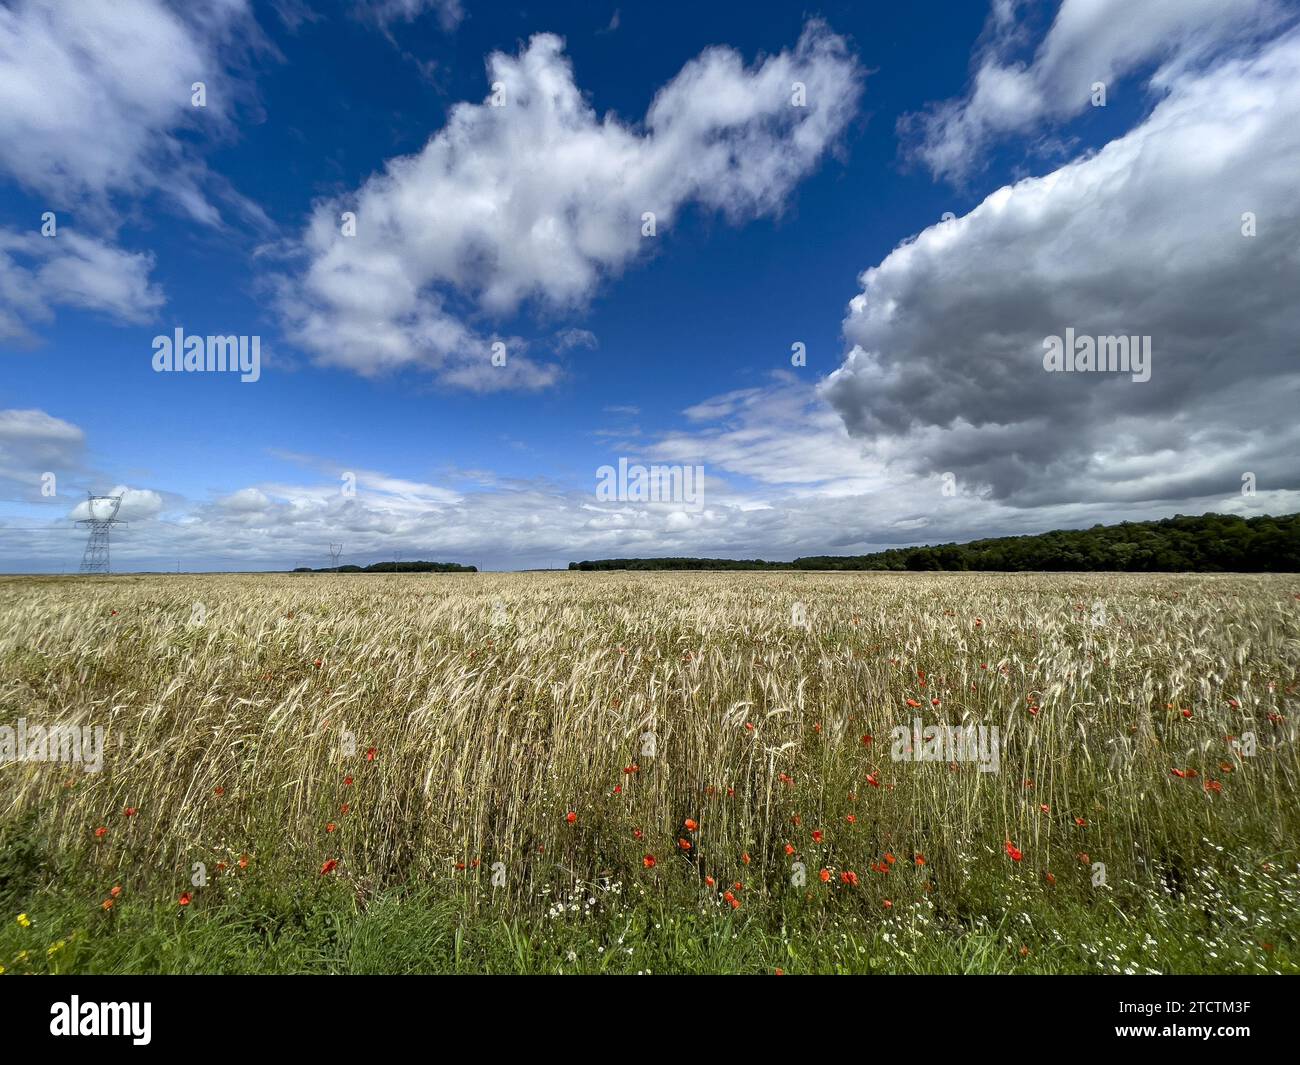 Wheat field with poppies in Eure, France Stock Photo